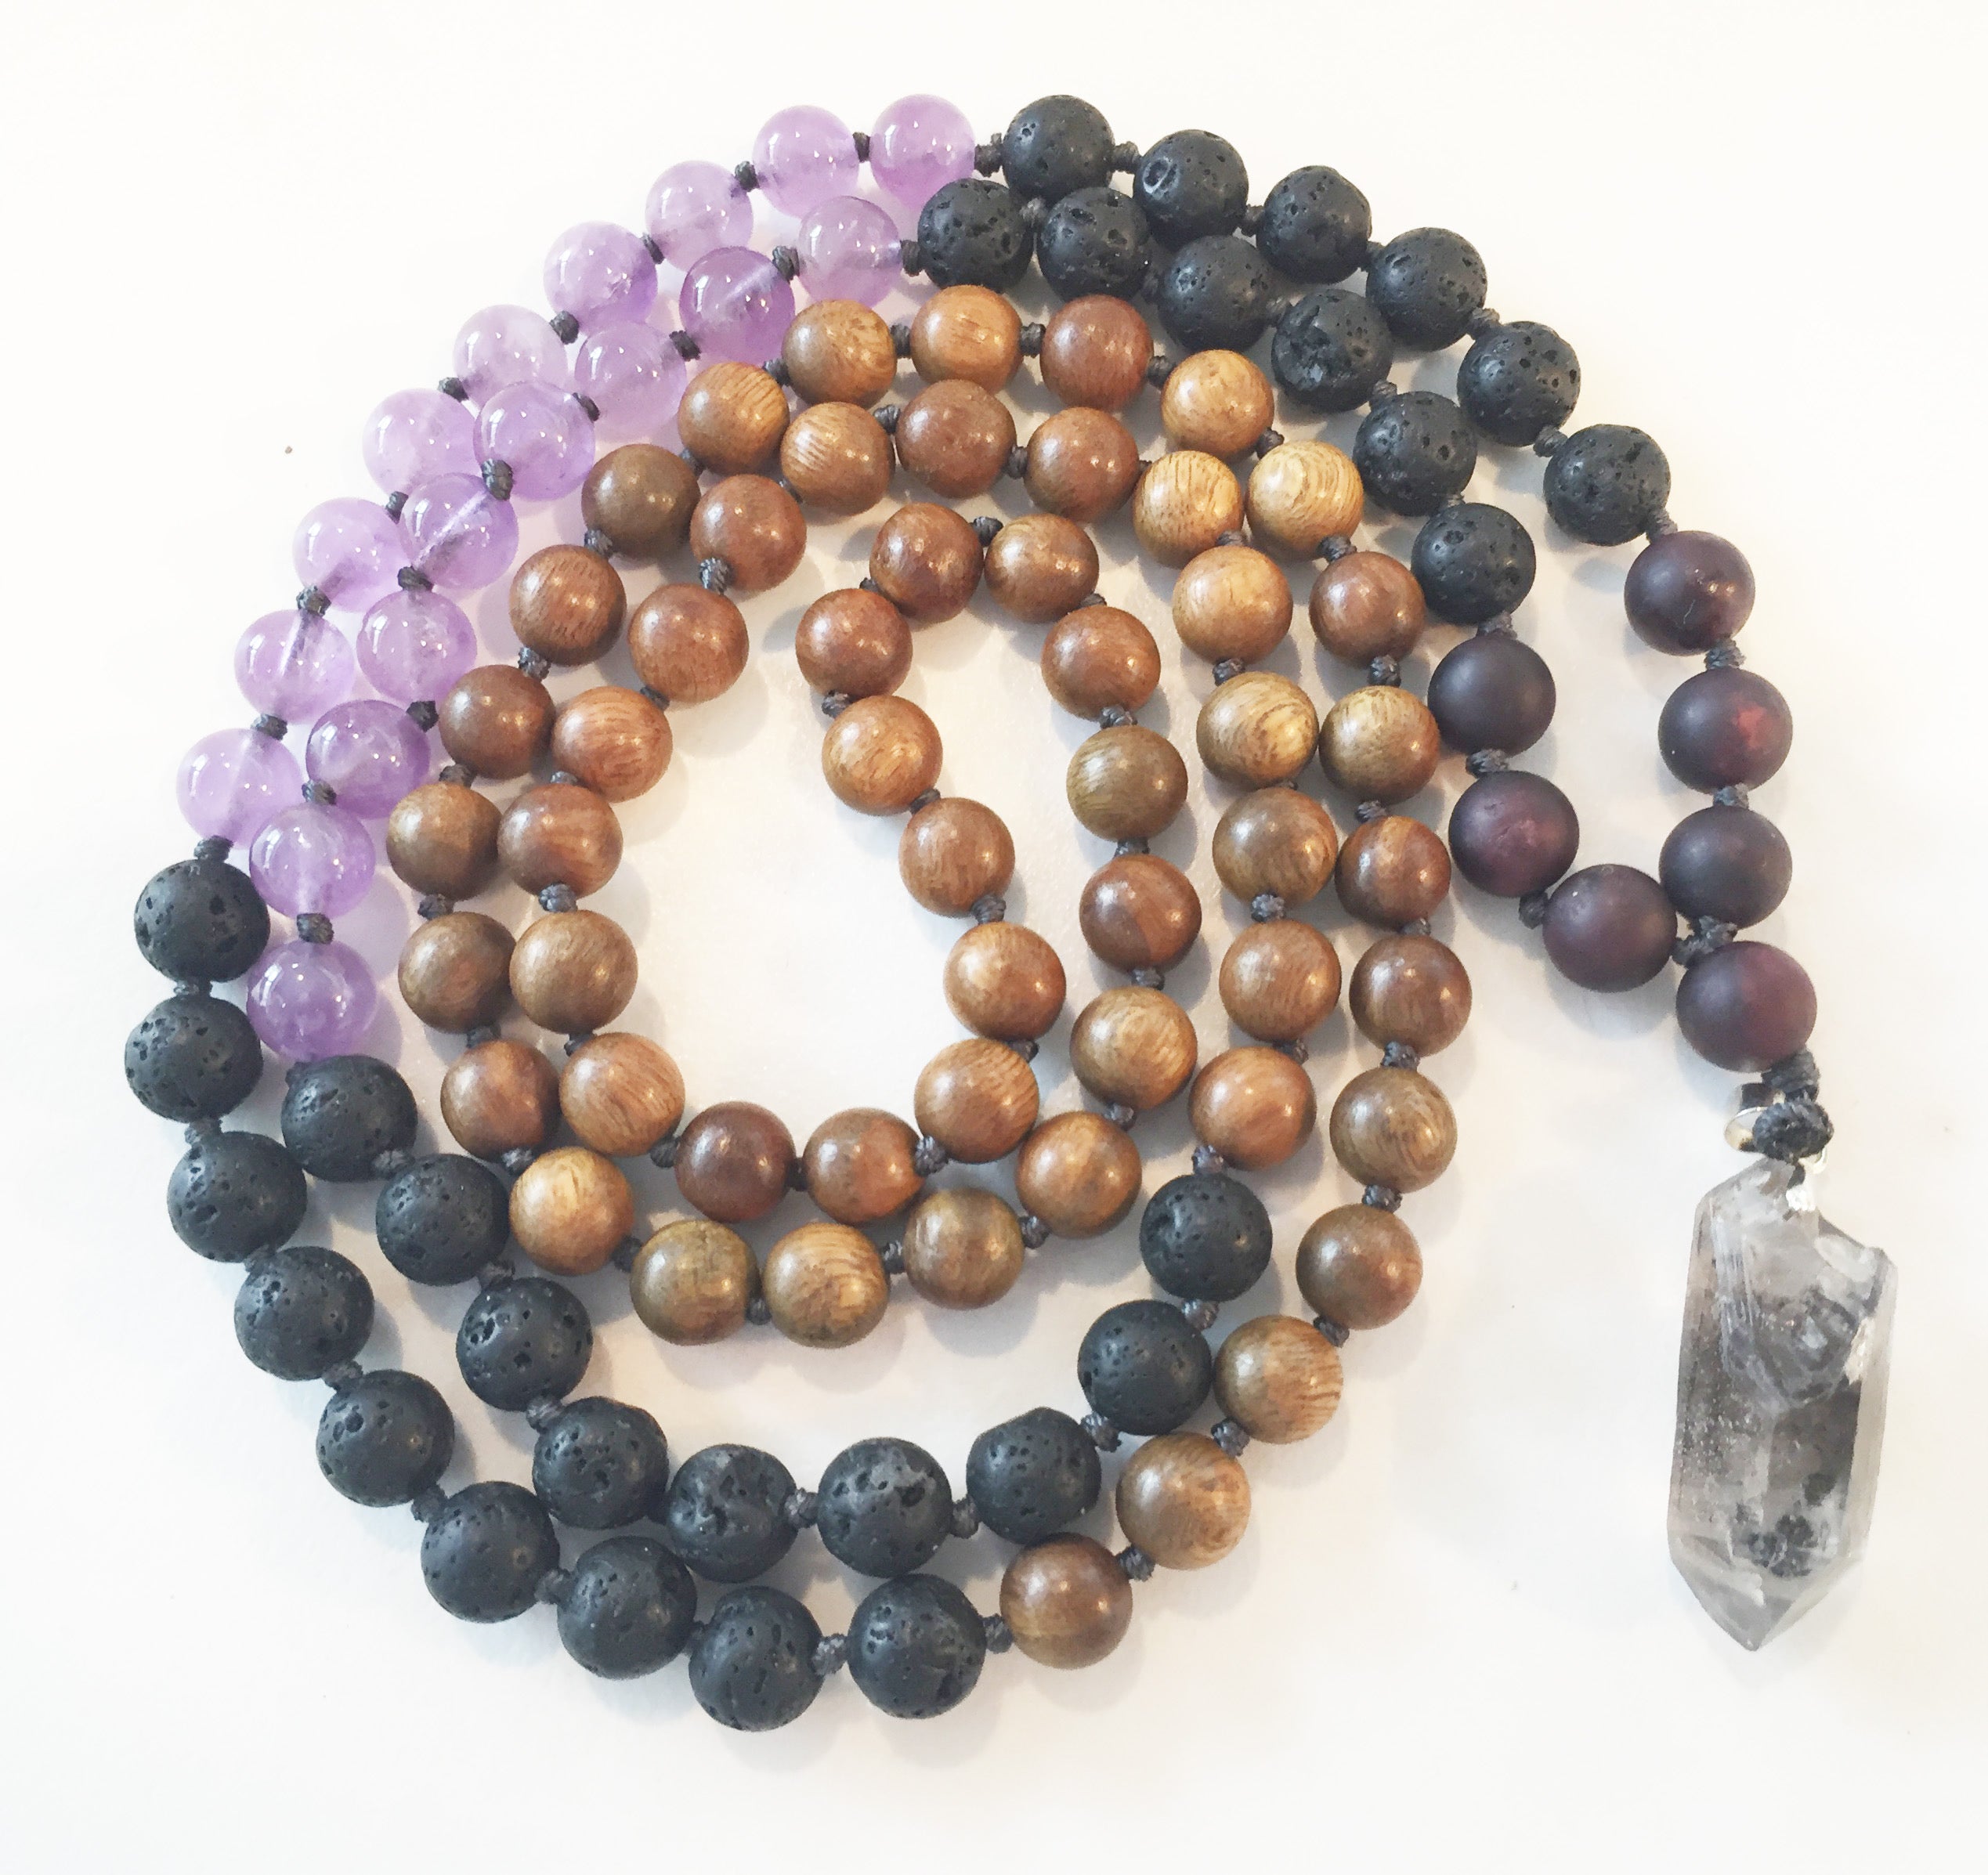 8mm Green Sandalwood & Amethyst 108 Knotted Mala Necklace with Crystal Pendant